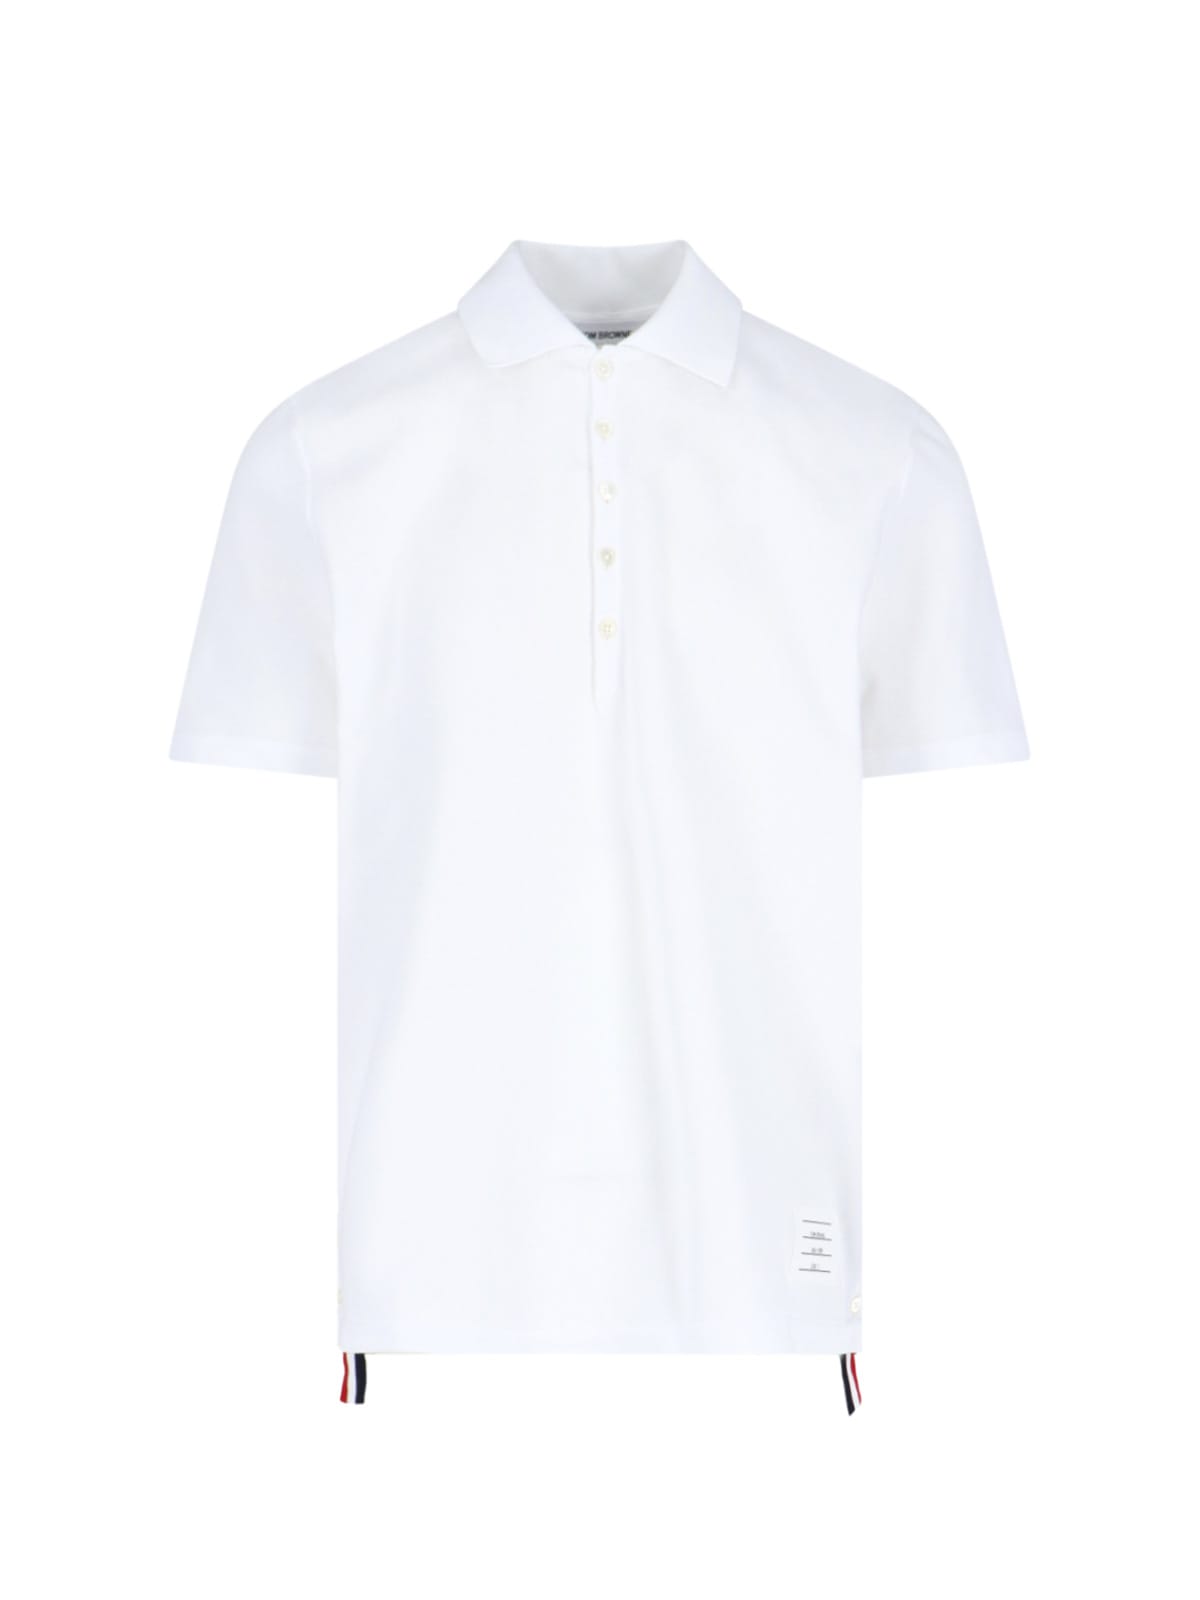 THOM BROWNE POLO SHIRT WITH TRICOLOR DETAIL ON THE BACK